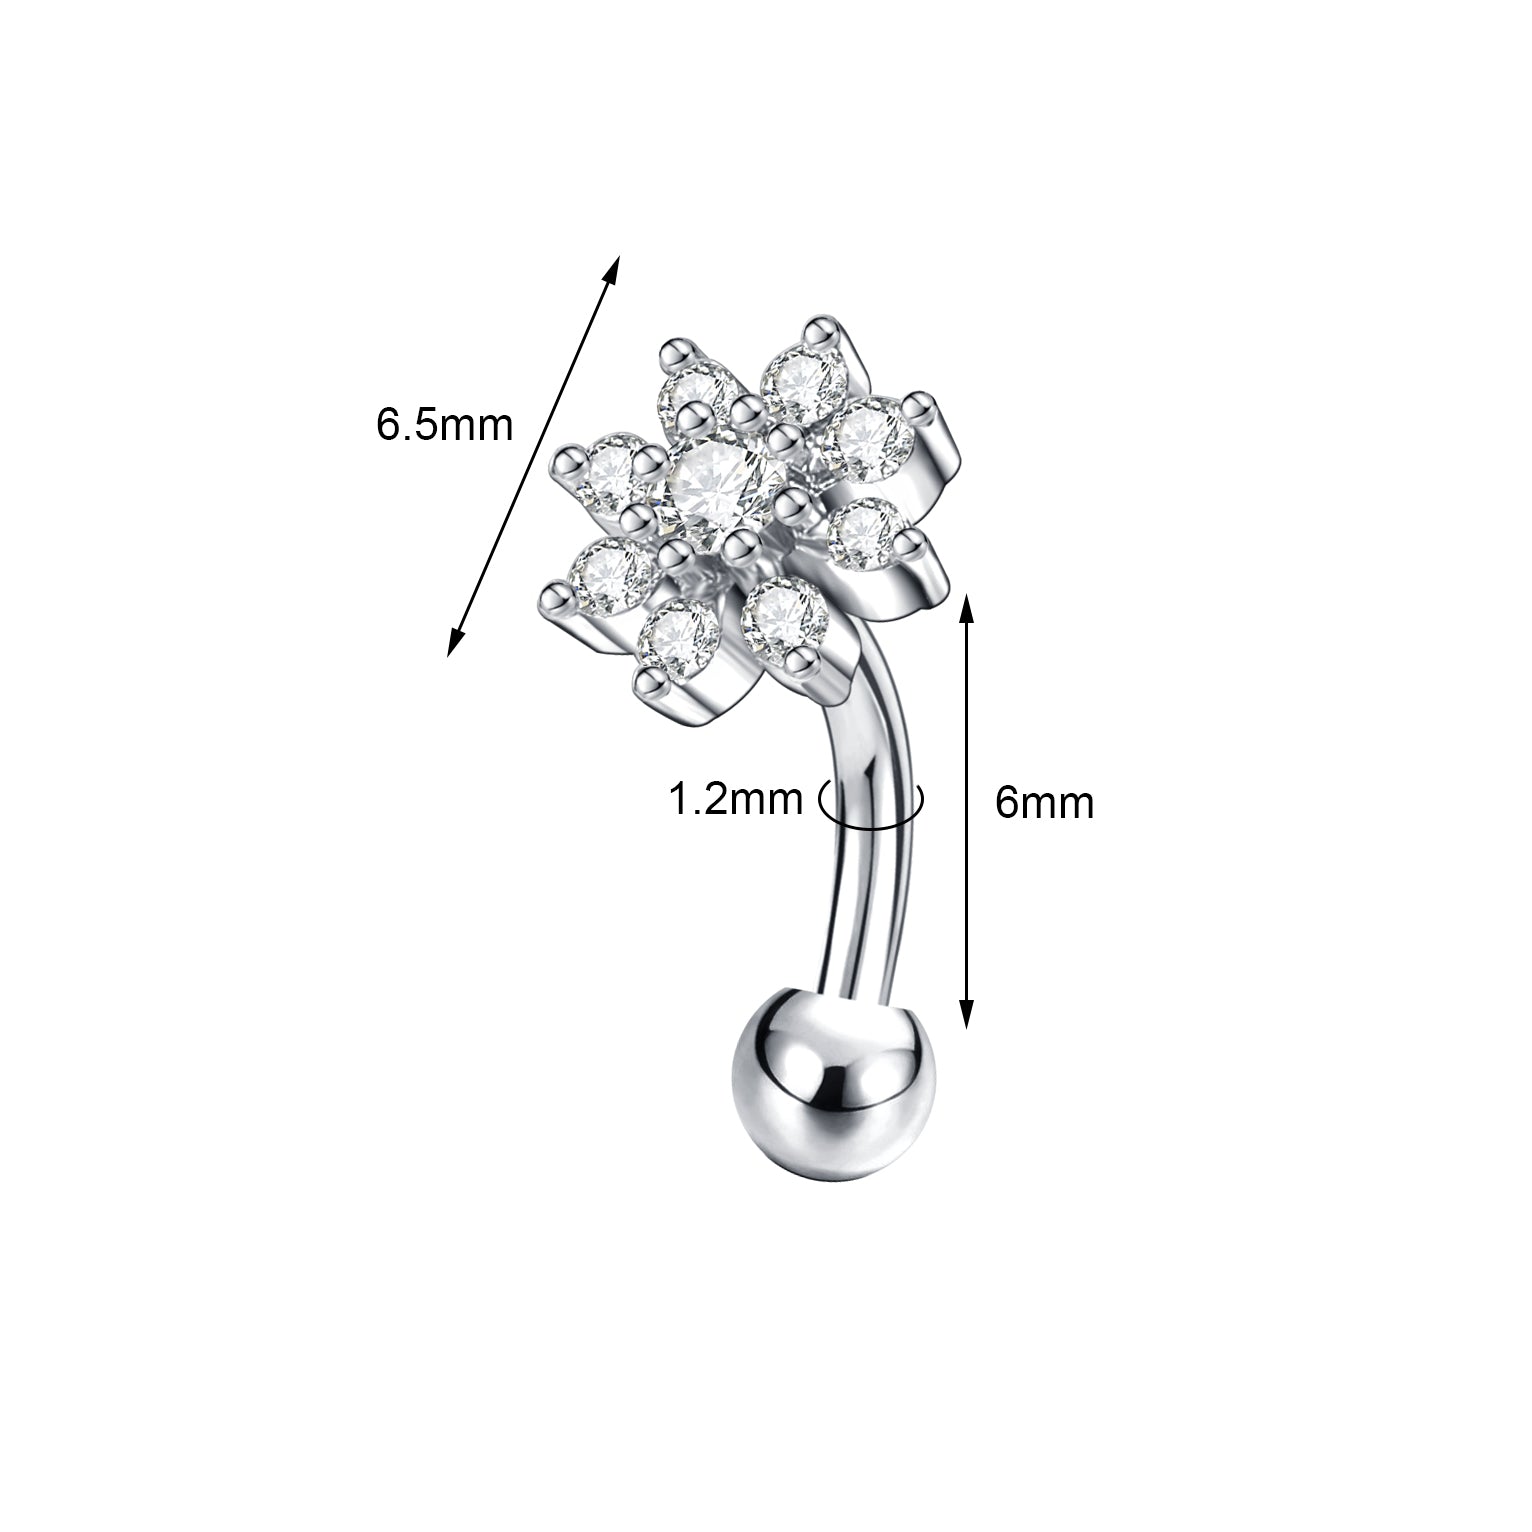 16g Flower Crystal Eyebrow Ring Piercing Barbell Curved Helix Daith Rook Piercing